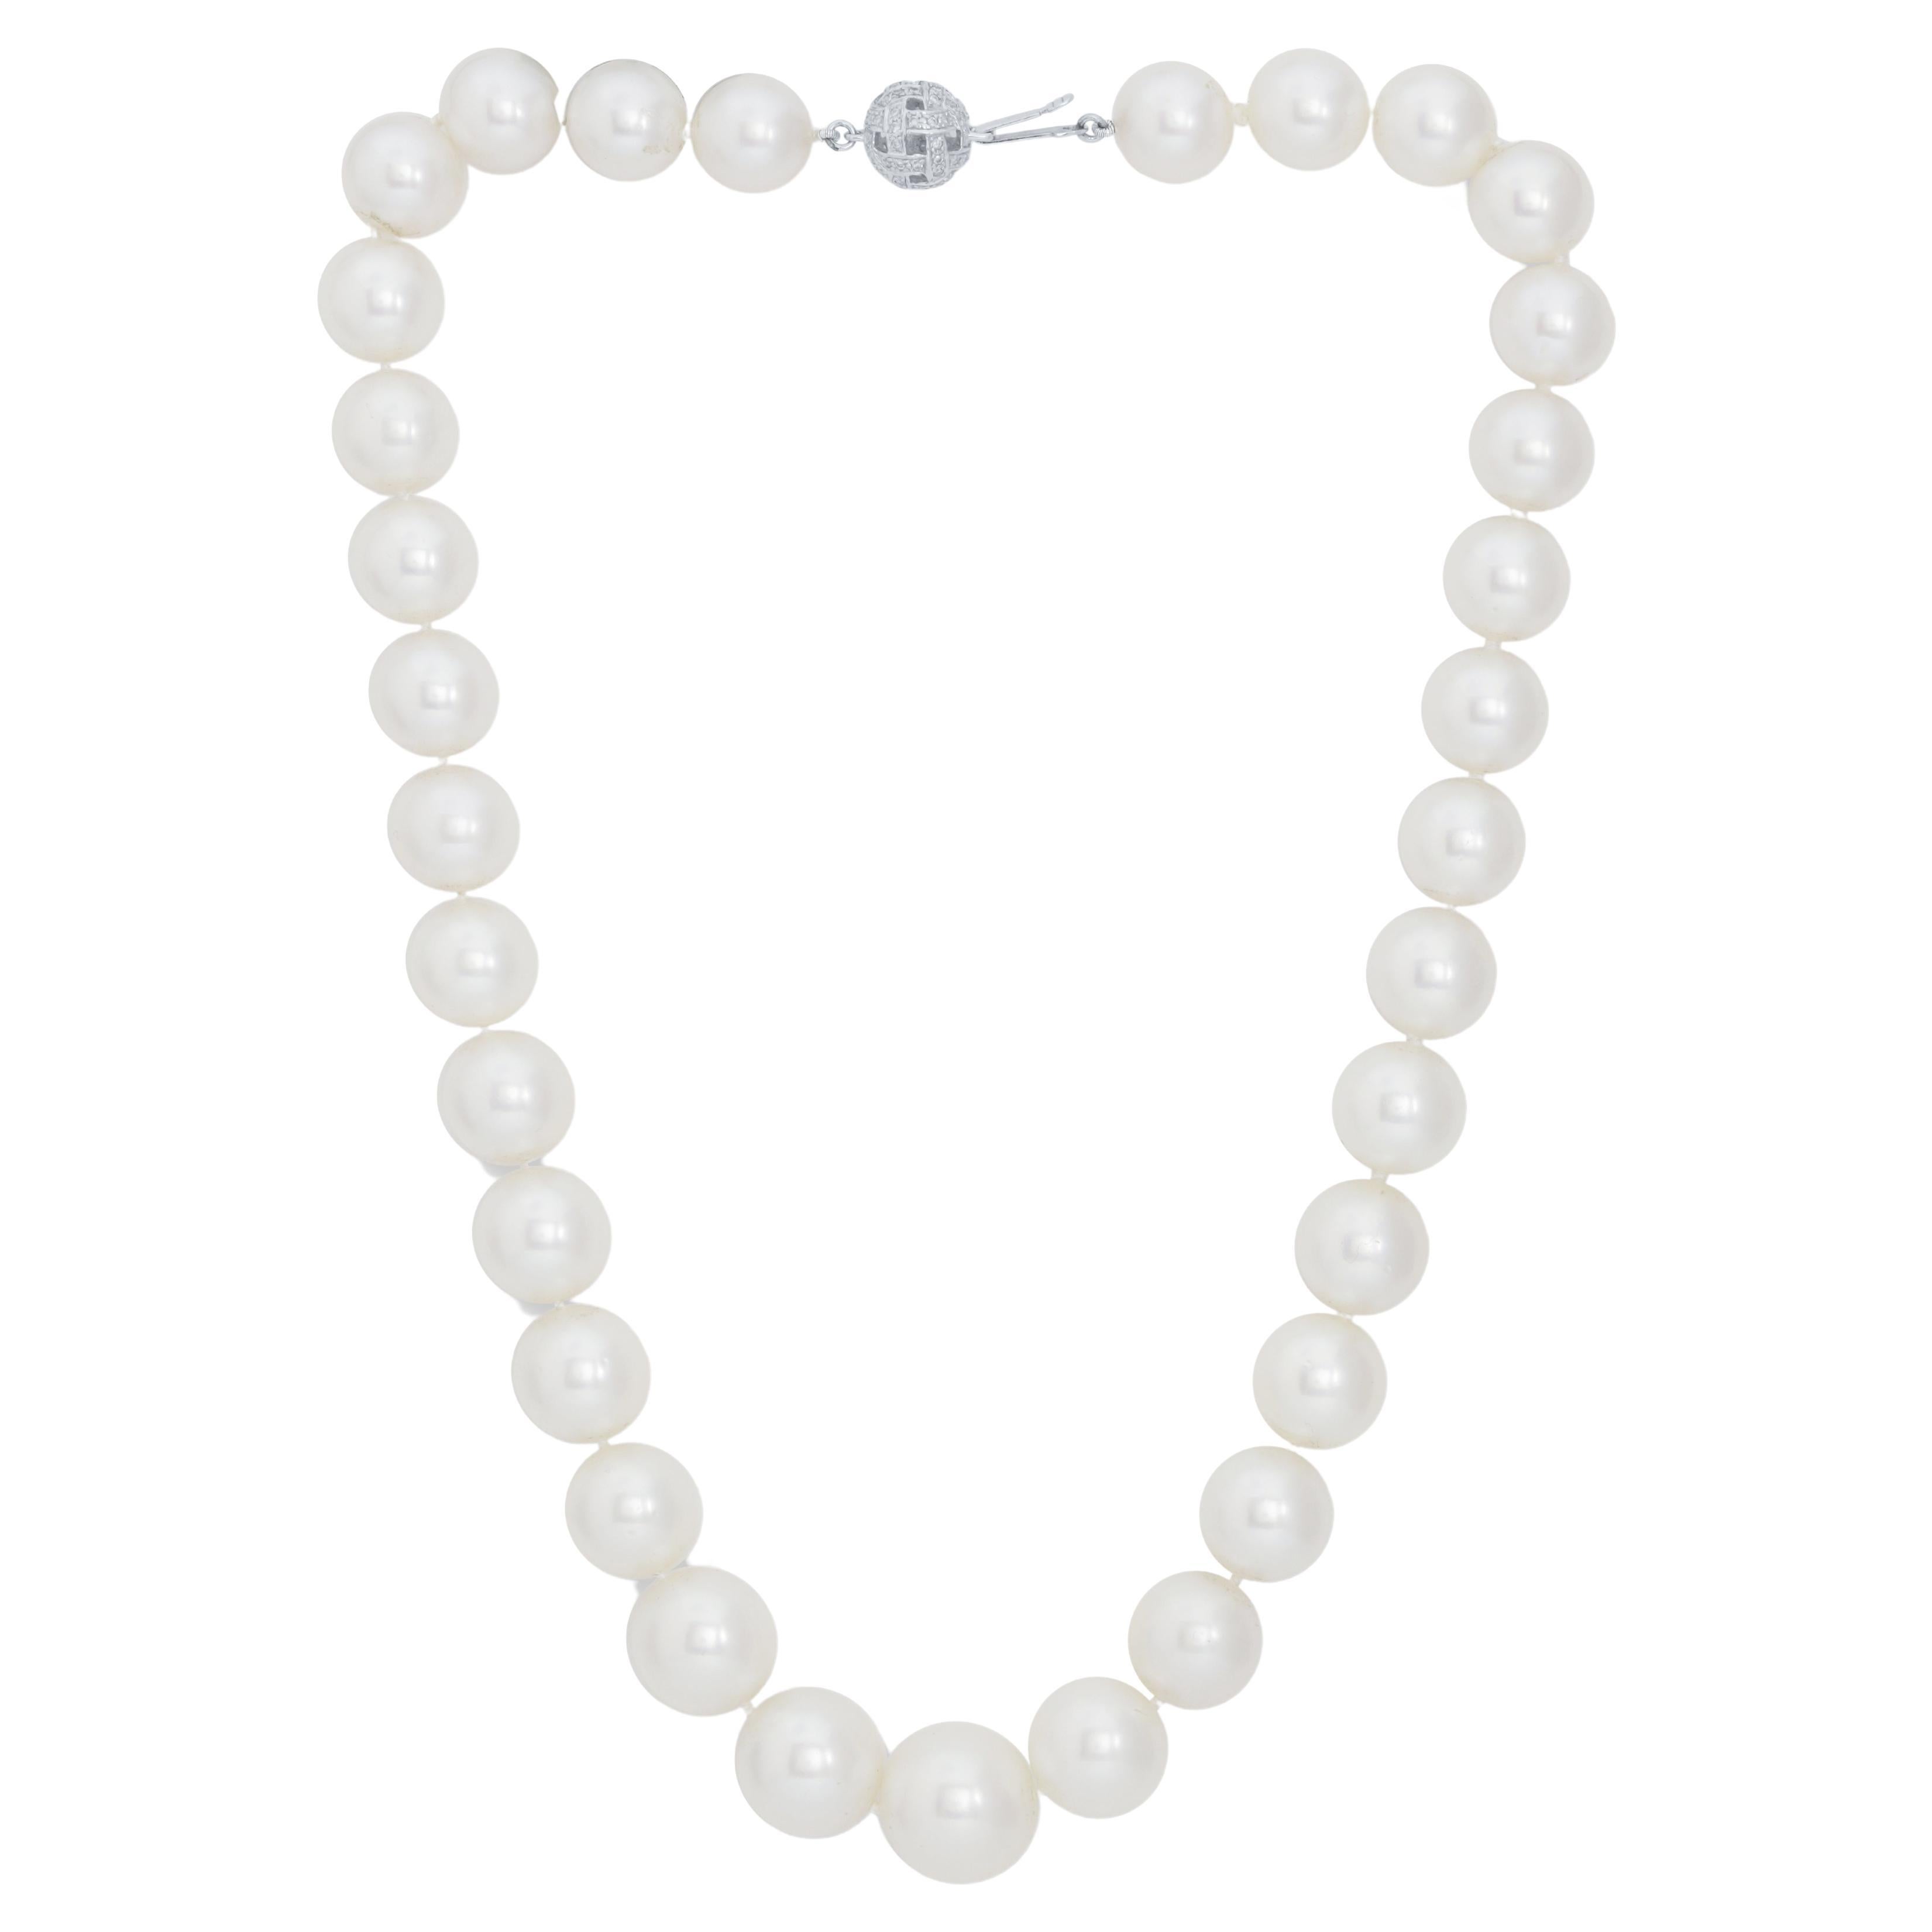 Diana M. 18 kt white gold pearl necklace adorned with 11-15 mm tahitian south se For Sale